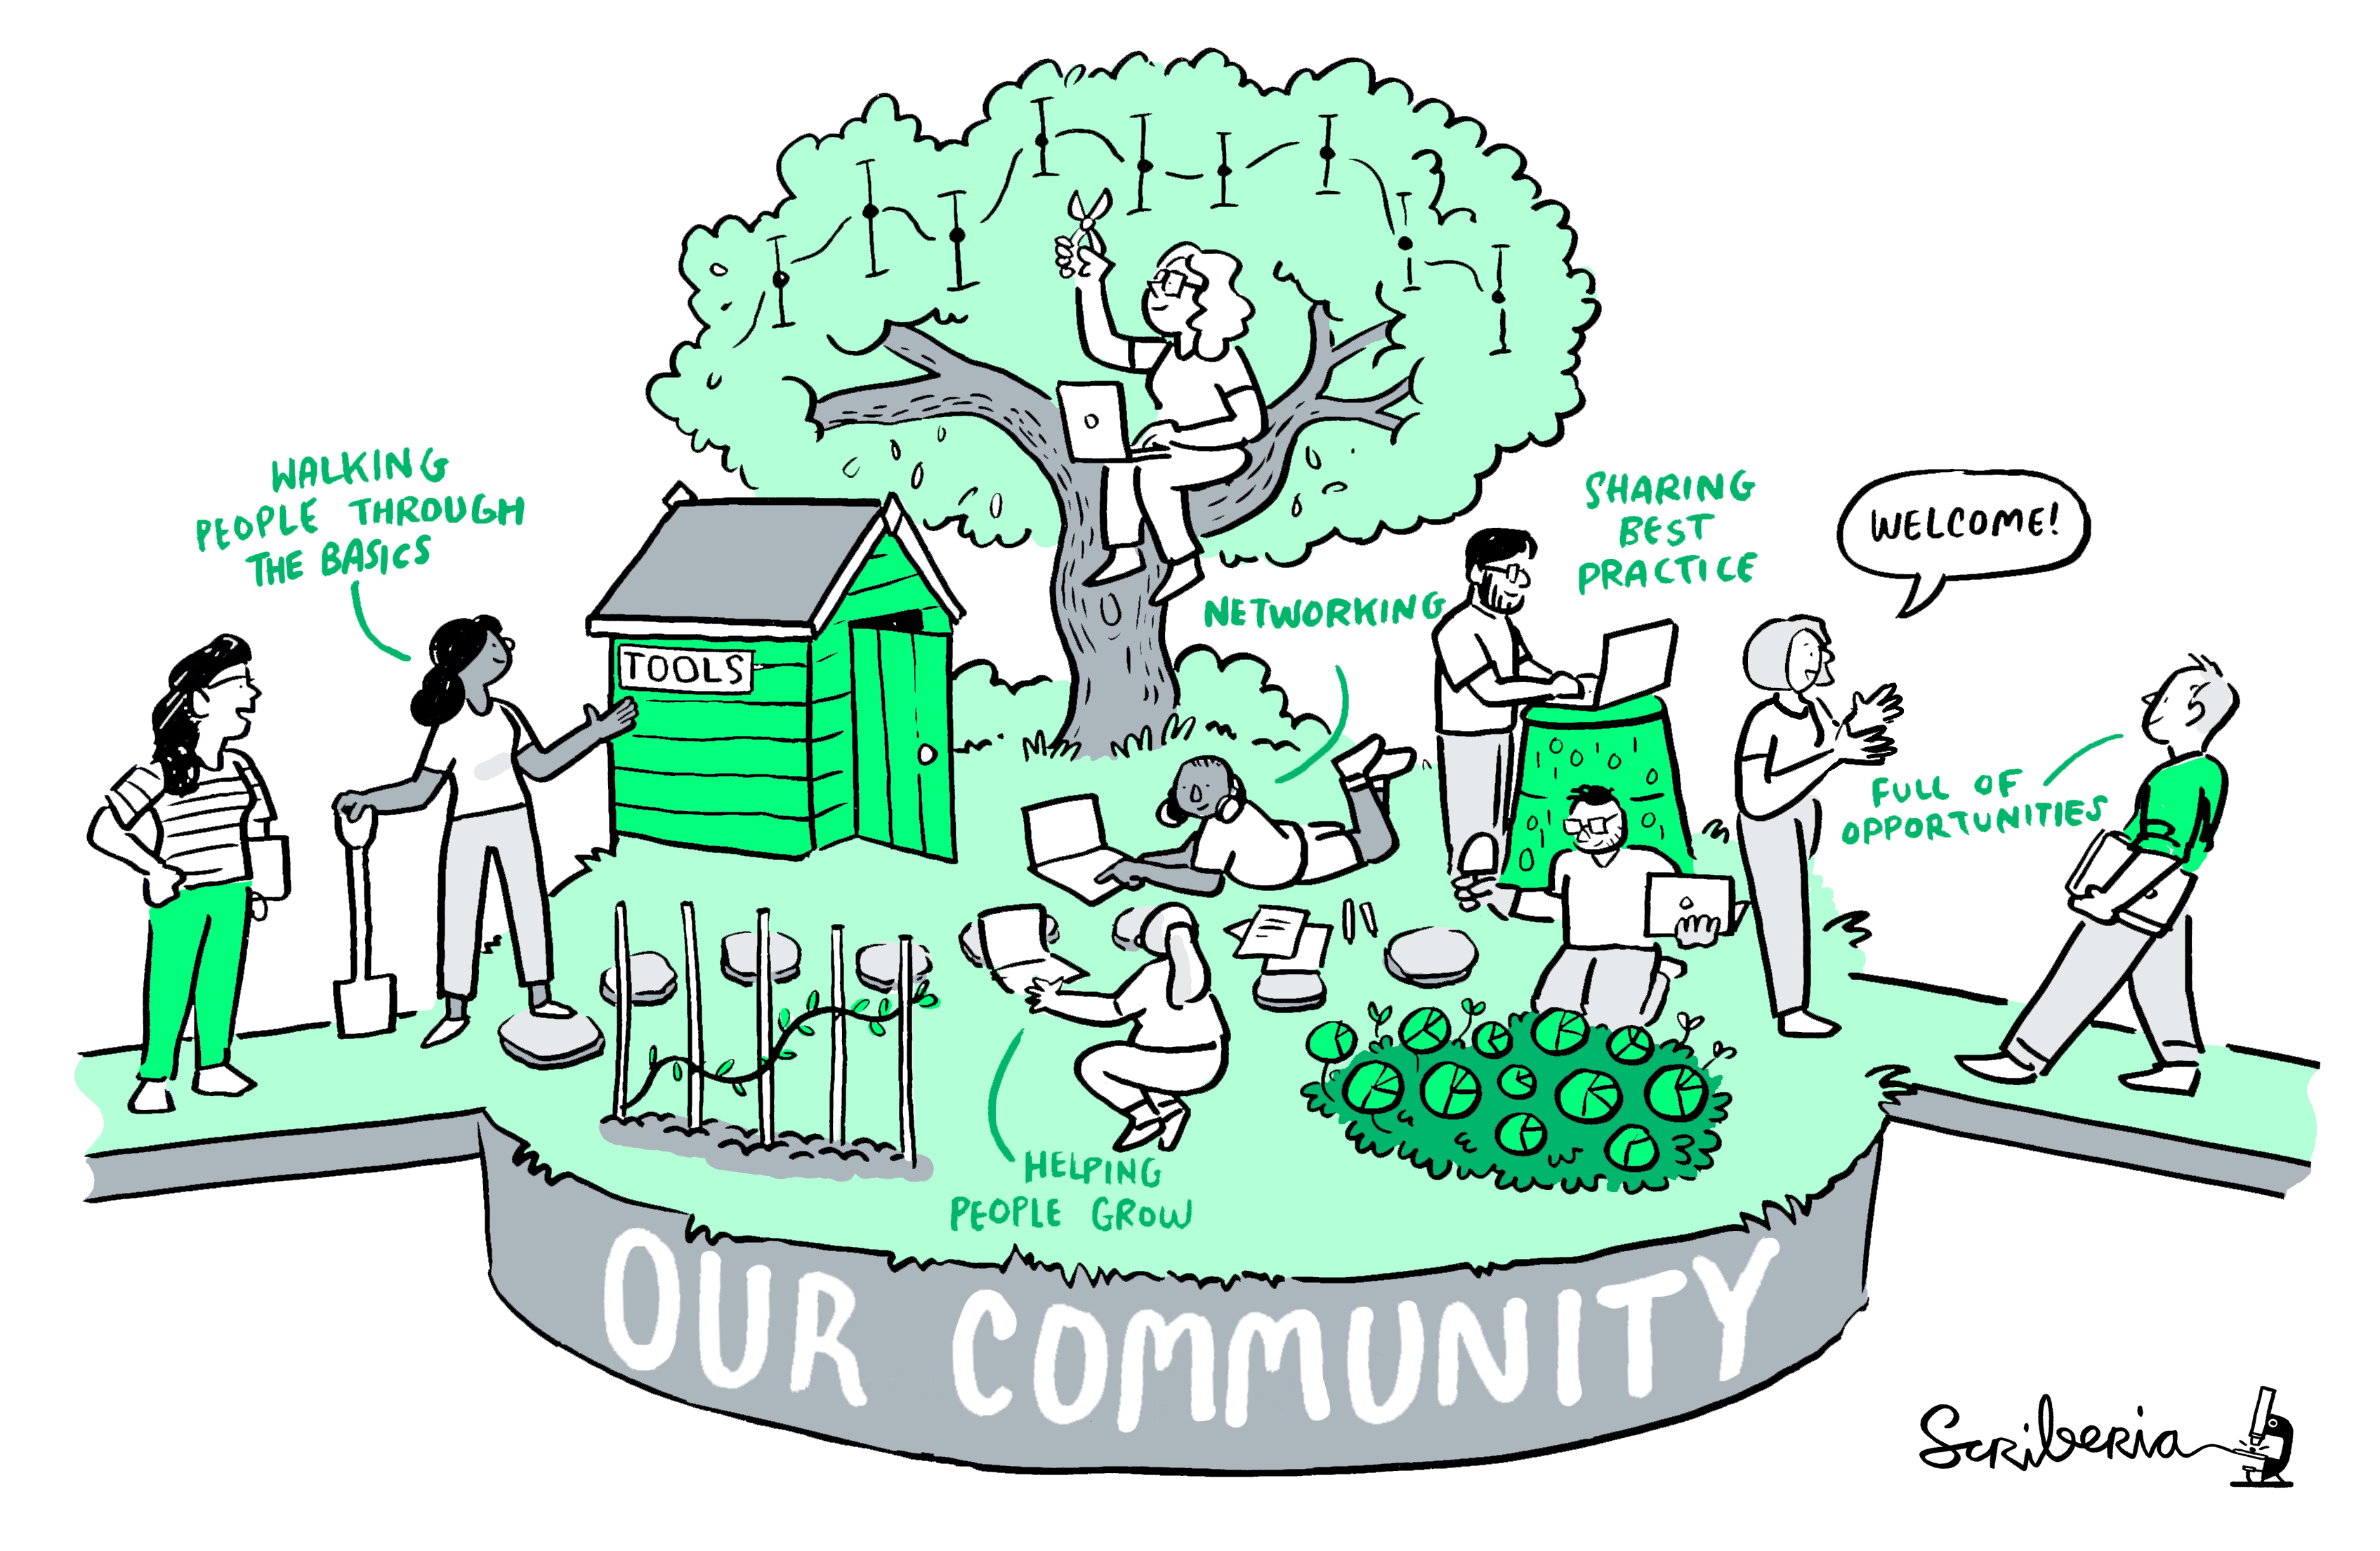 Cartoon of multiple people tending a garden - caption "our community"